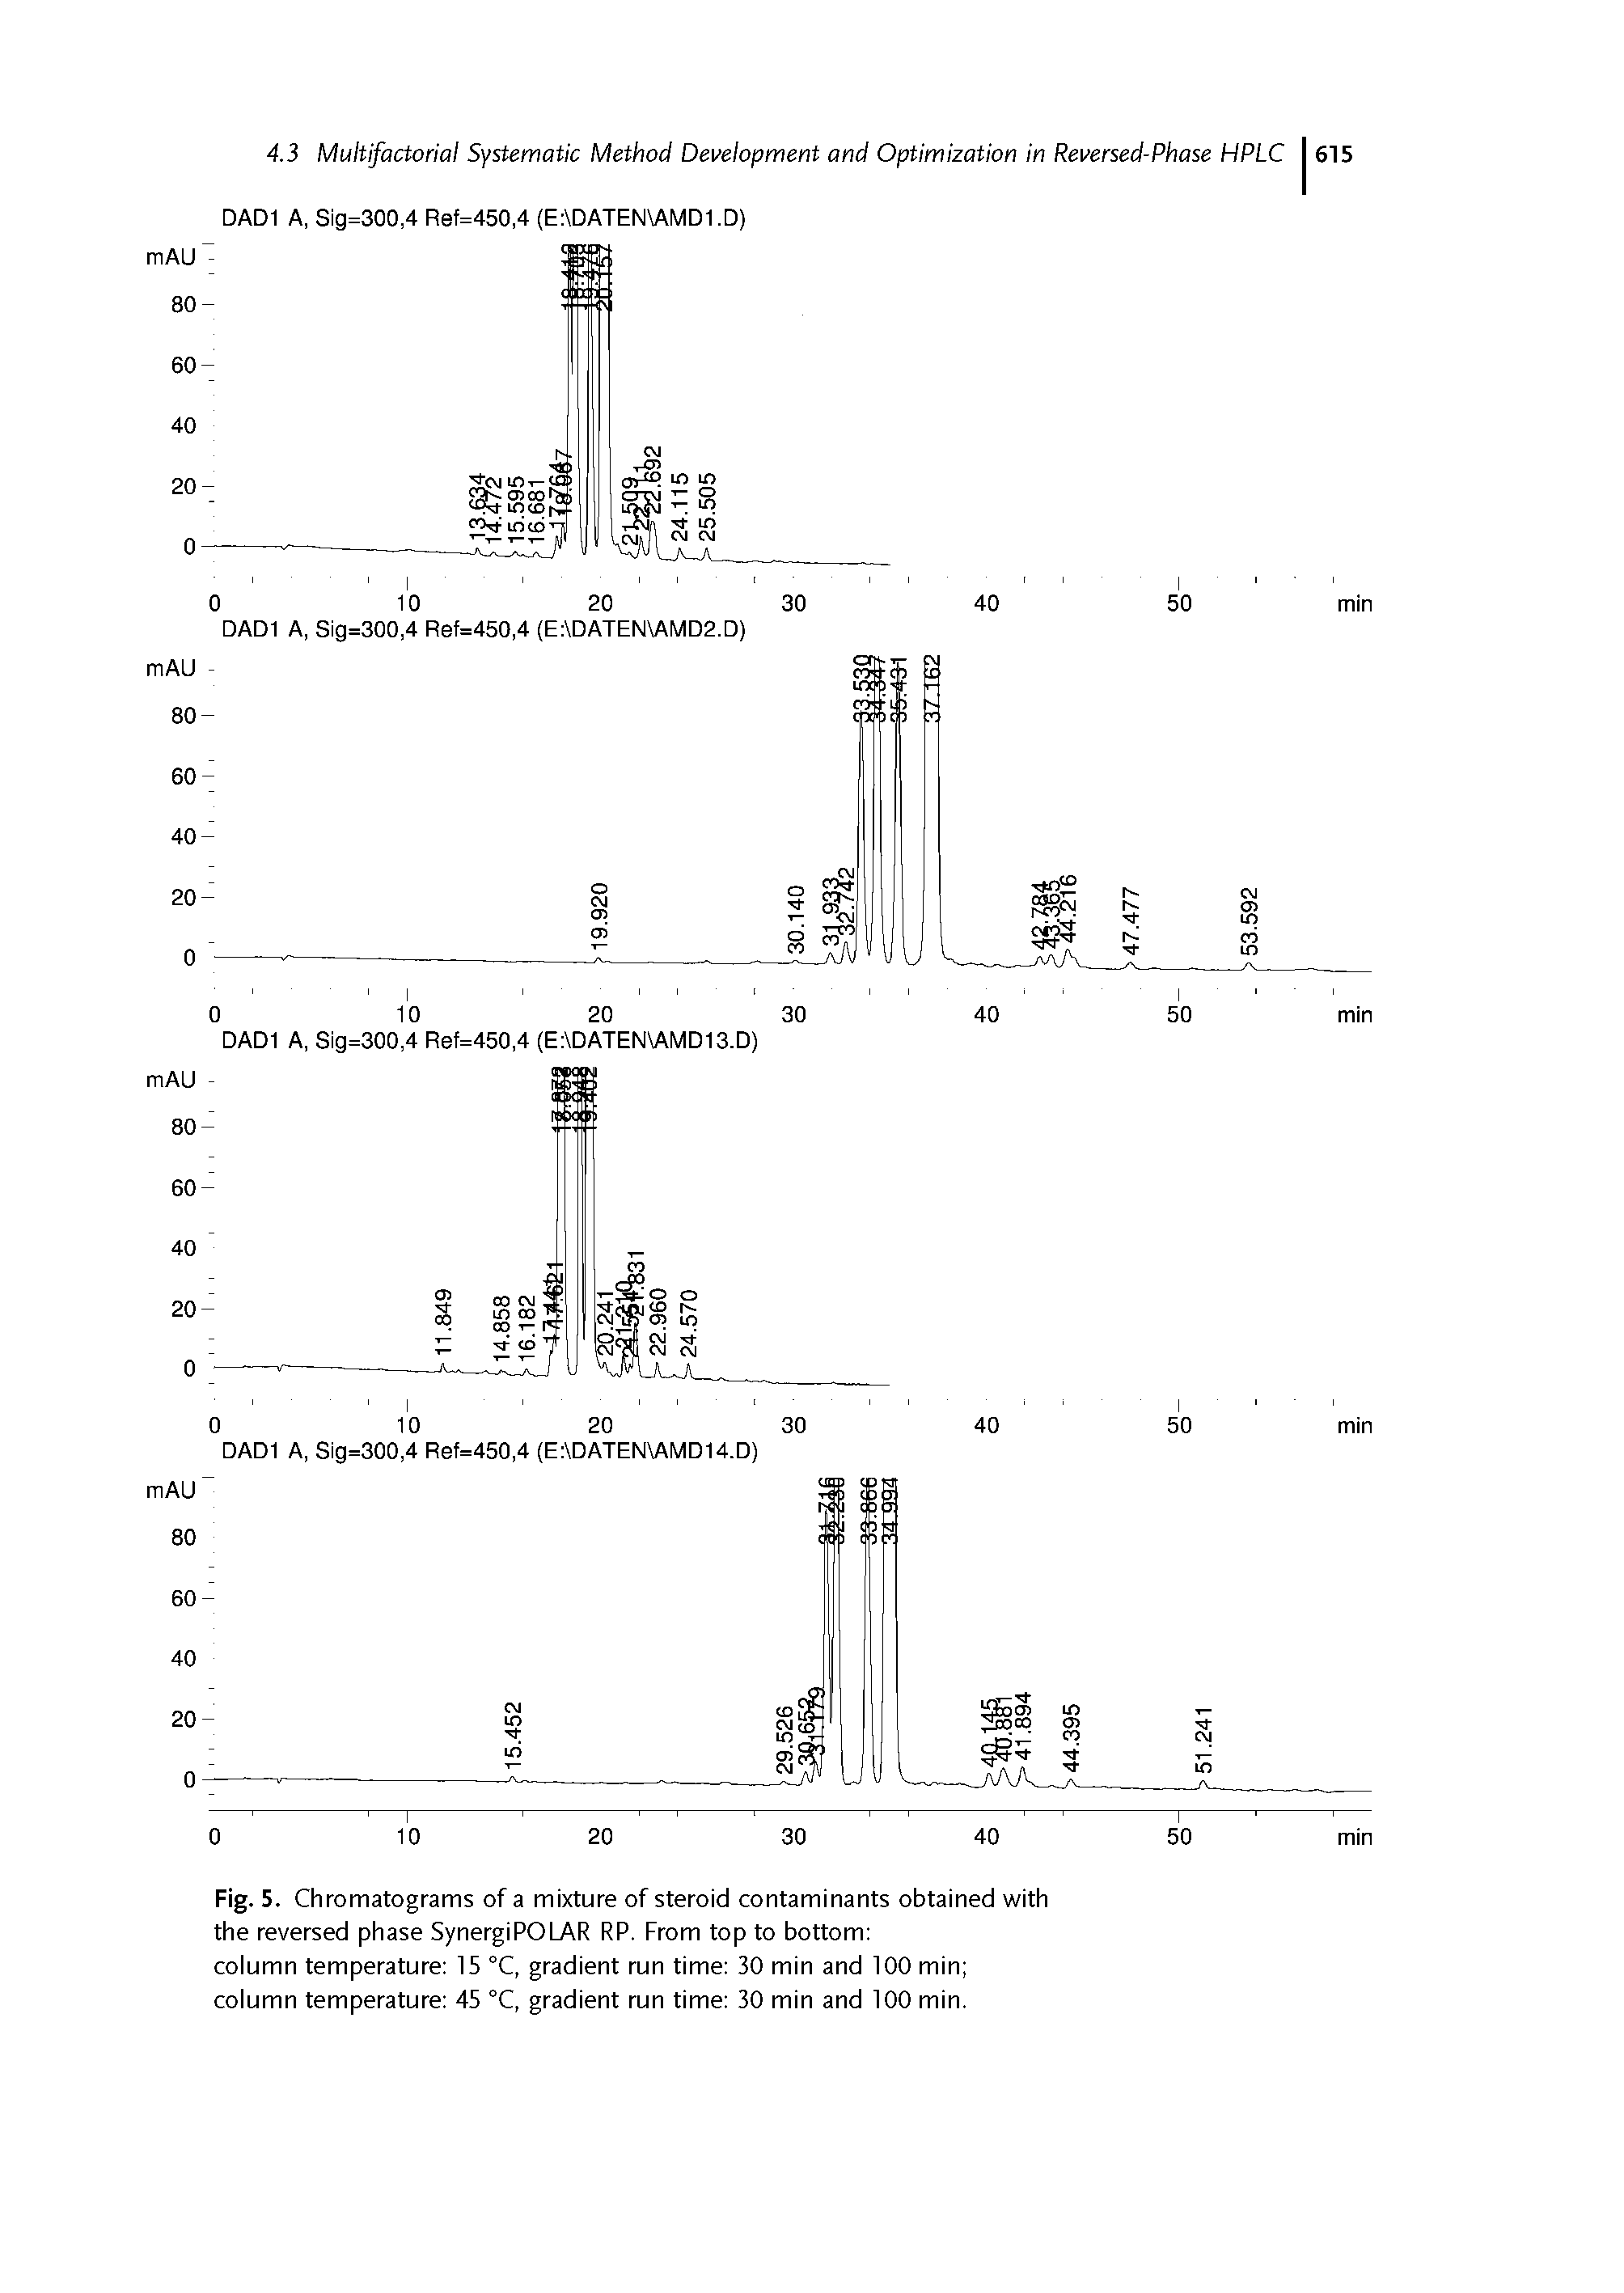 Fig. 5. Chromatograms of a mixture of steroid contaminants obtained with the reversed phase SynergiPOLAR RP. From top to bottom column temperature 15 °C, gradient run time 30 min and 100 min column temperature 45 °C, gradient run time 30 min and 100 min.